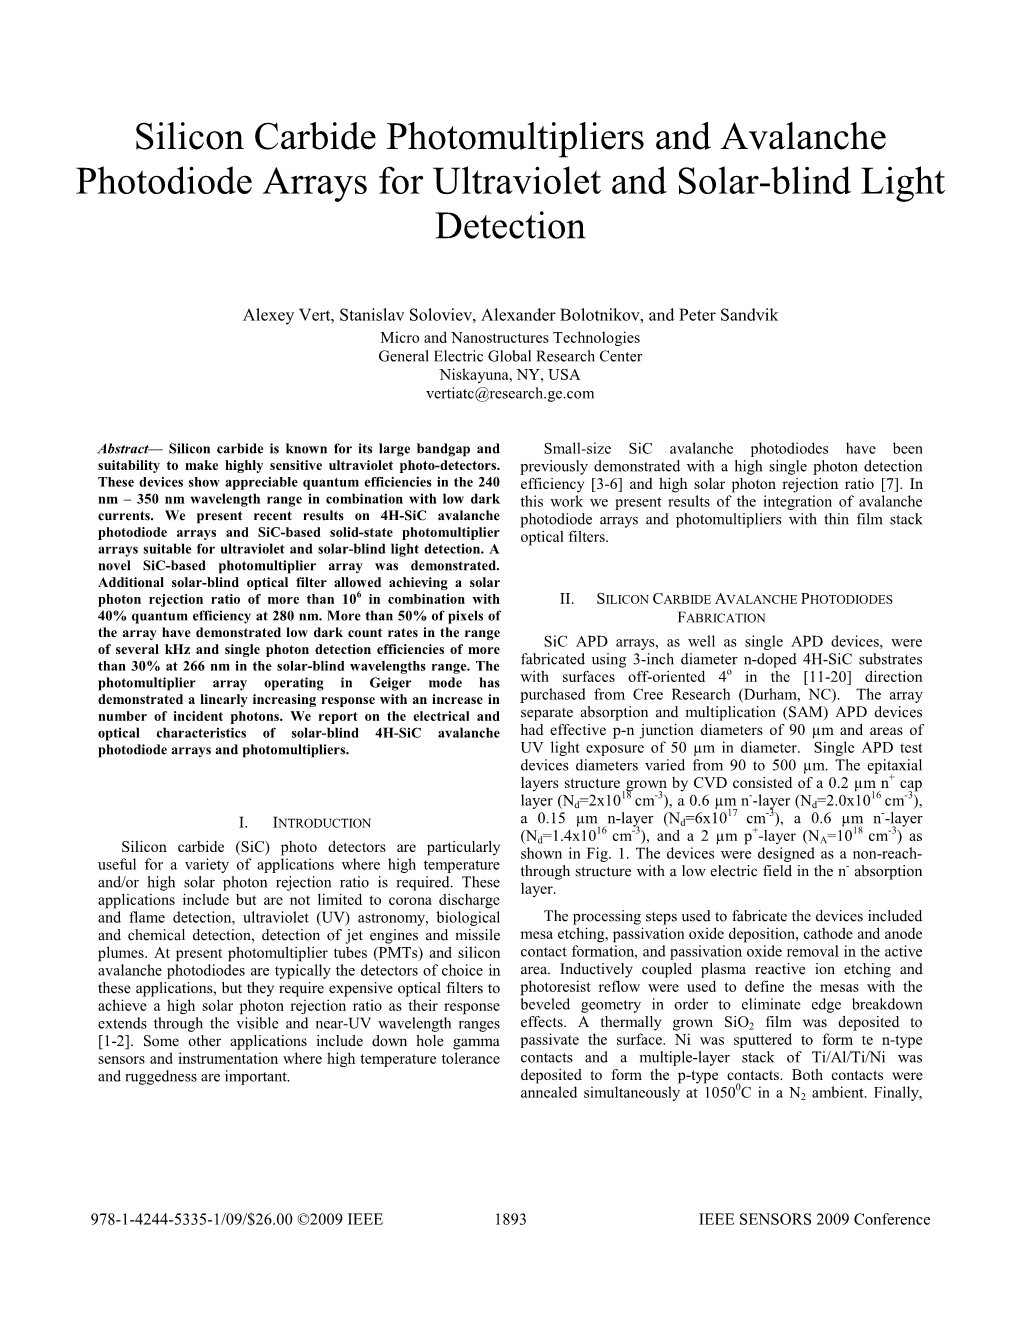 Silicon Carbide Photomultipliers and Avalanche Photodiode Arrays for Ultraviolet and Solar-Blind Light Detection